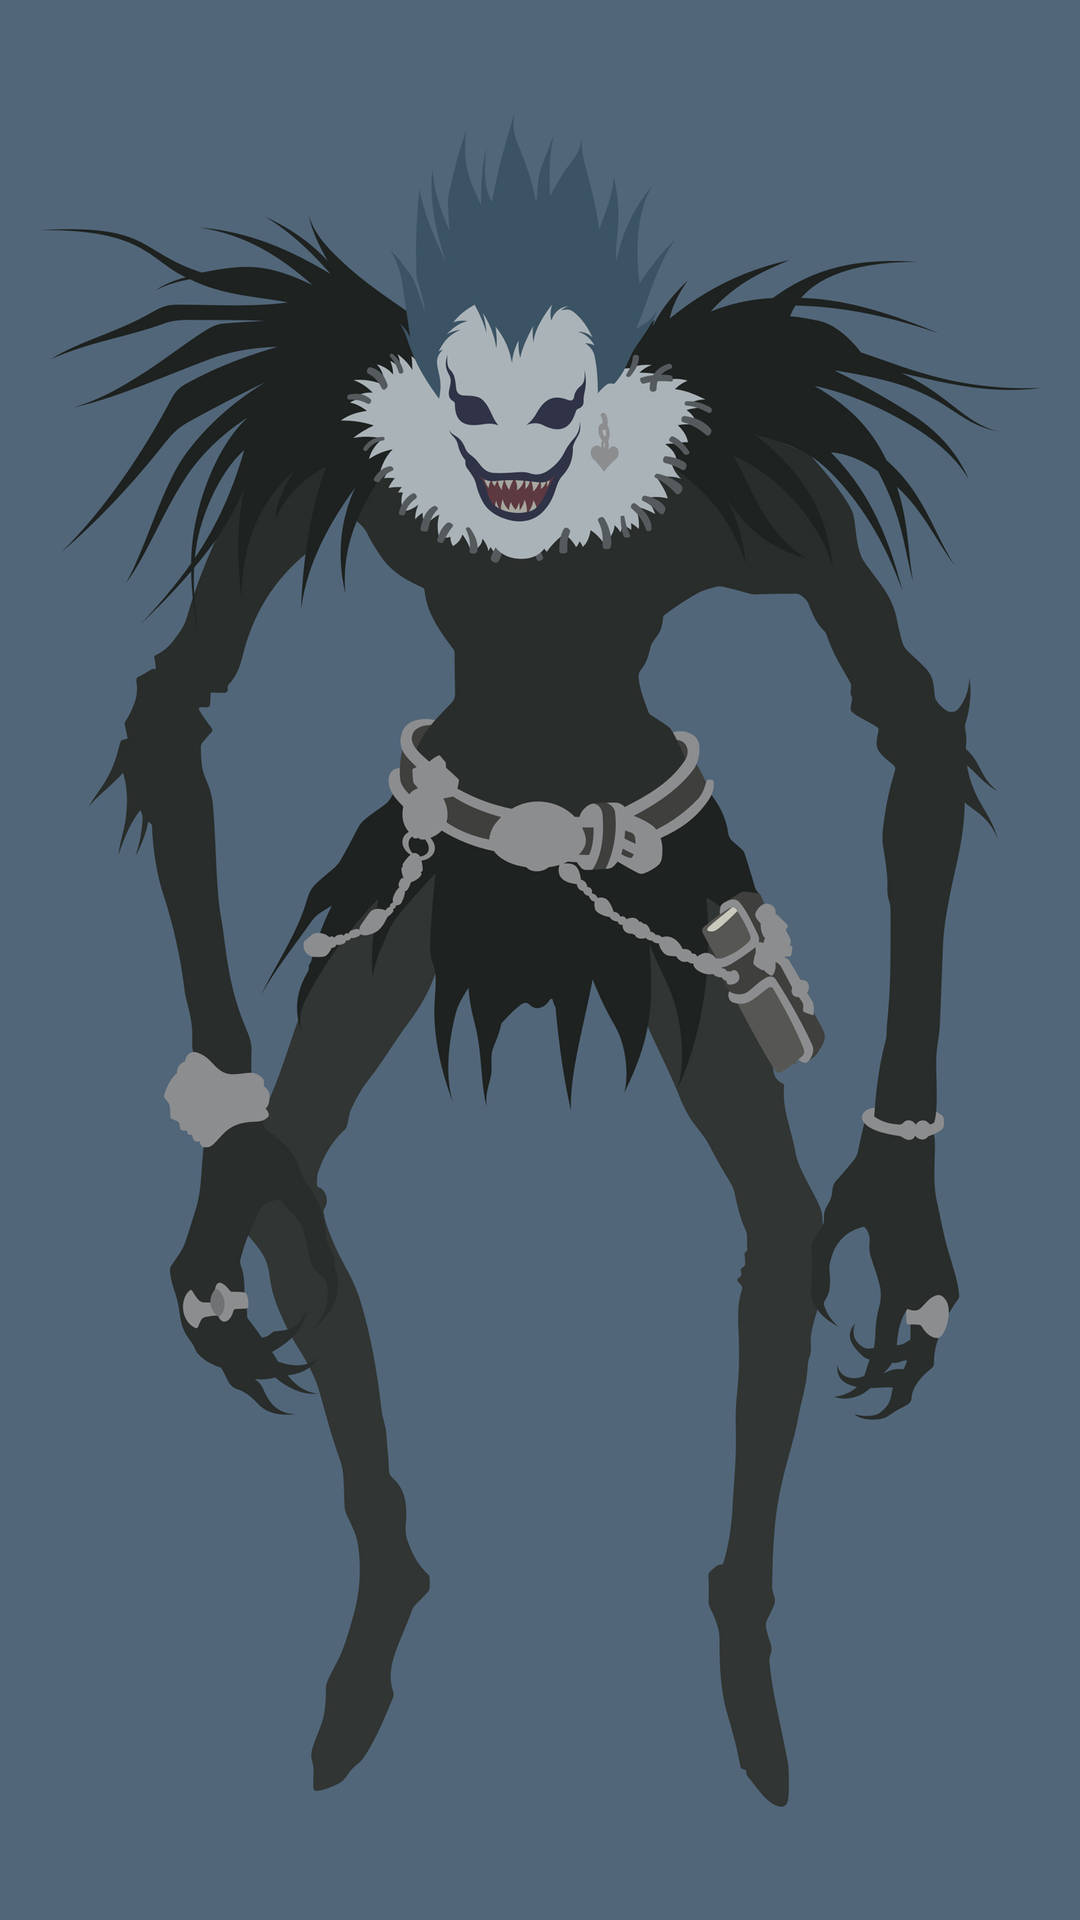 Floating Ryuk Artwork From Death Note iPhone Wallpaper